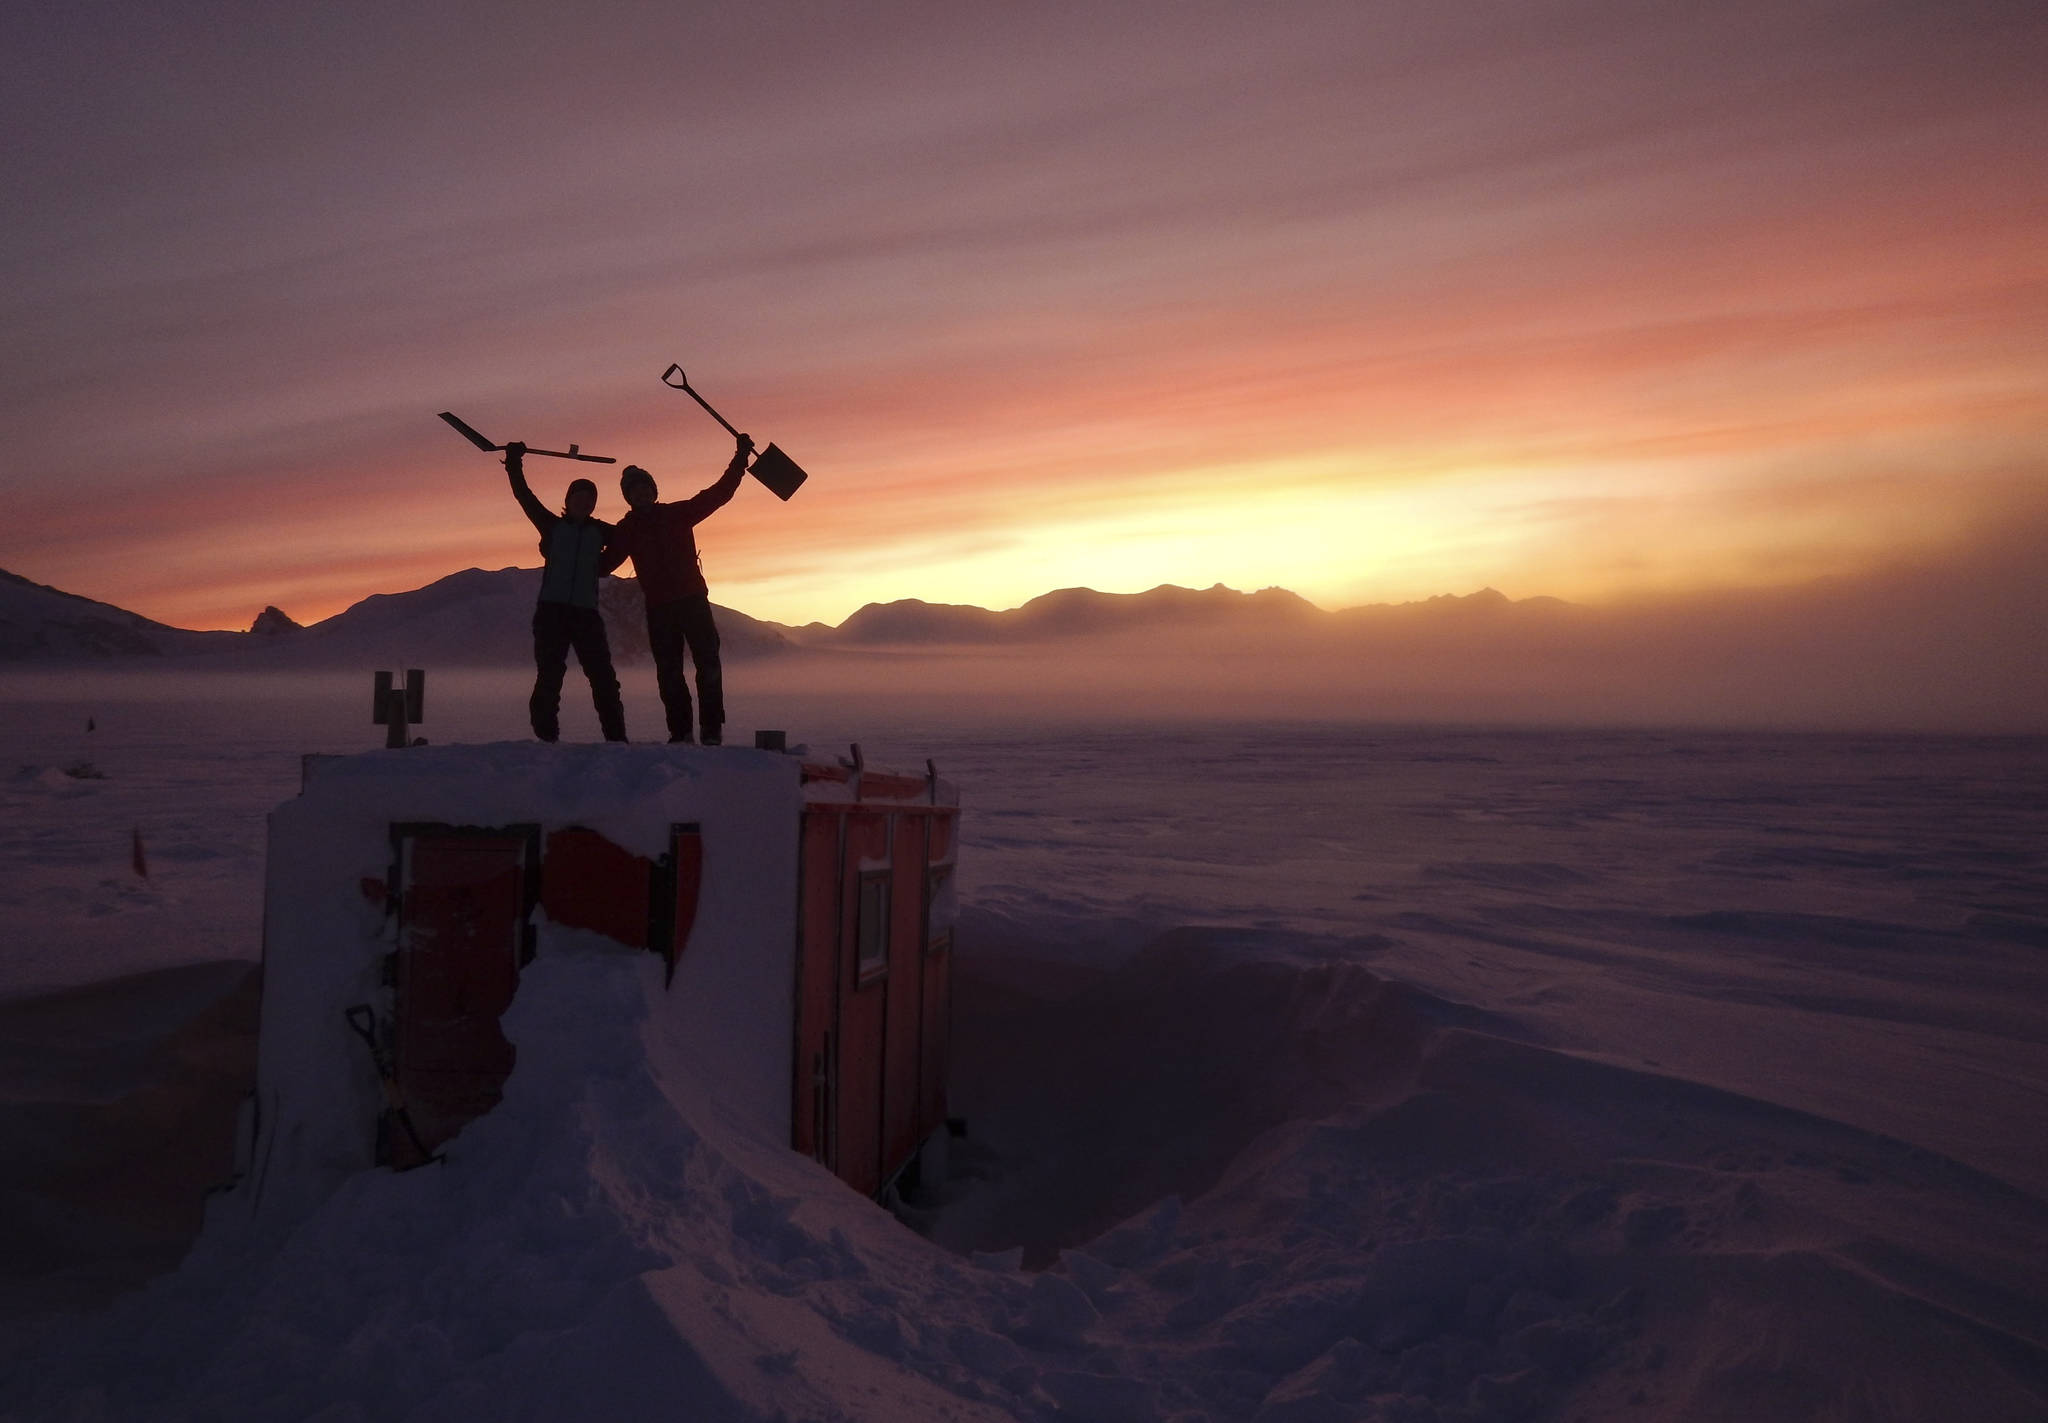 In this handout photo provided by British Antarctic Survey, field guides Sarah Crowsley, left, and Sam Hunt, right, pose for a photo after digging out the caboose, a container used for accommodation that can be moved by a tractor, at Adelaide island, in Antarctica on Friday, June 19, 2020. Antarctica remains the only continent without COVID-19 and now in Sept. 2020, as nearly 1,000 scientists and others who wintered over on the ice are seeing the sun for the first time in months, a global effort wants to make sure incoming colleagues don’t bring the virus with them. (Robert Taylor/British Antarctic Survey via AP)